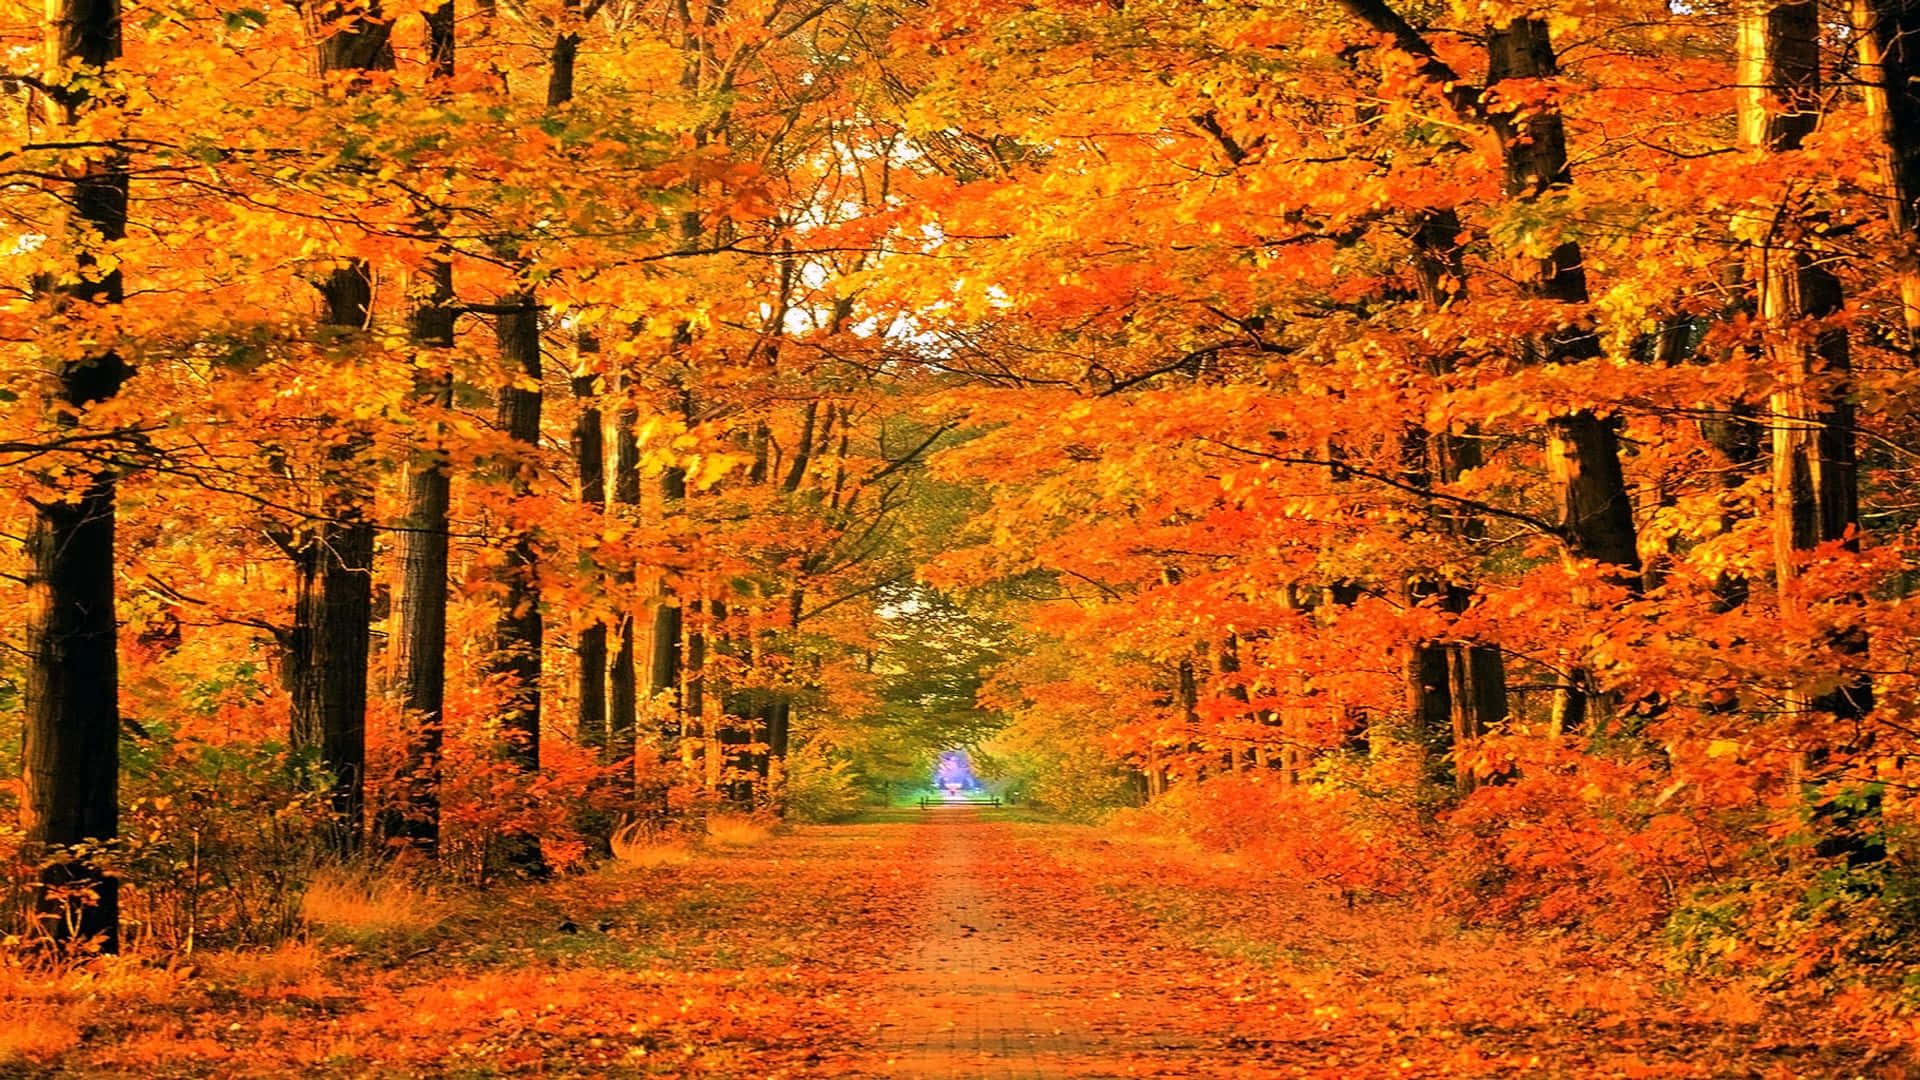 Enjoy the colors of fall. Wallpaper